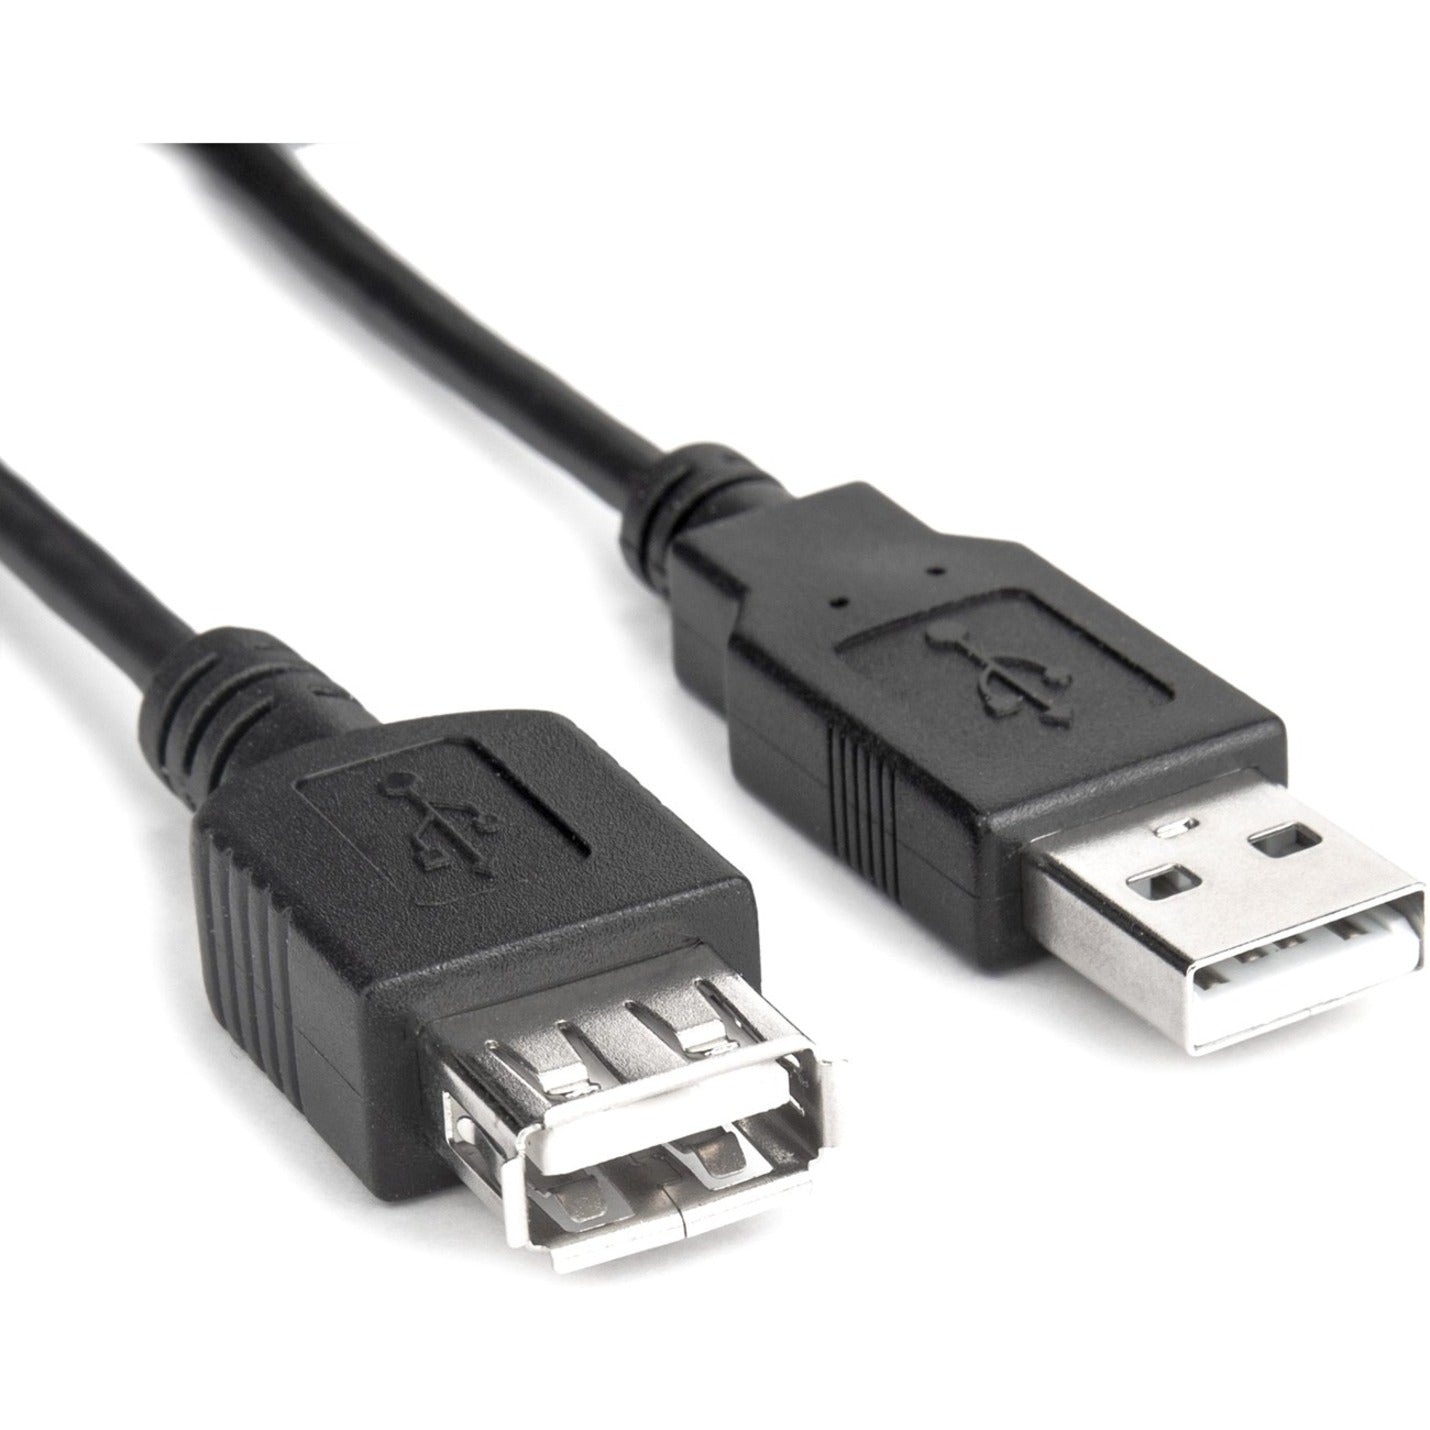 Rocstor Y10C117-B1 Premium USB Extension Cable, 6ft, USB 2.0 Type A to Type A, Black